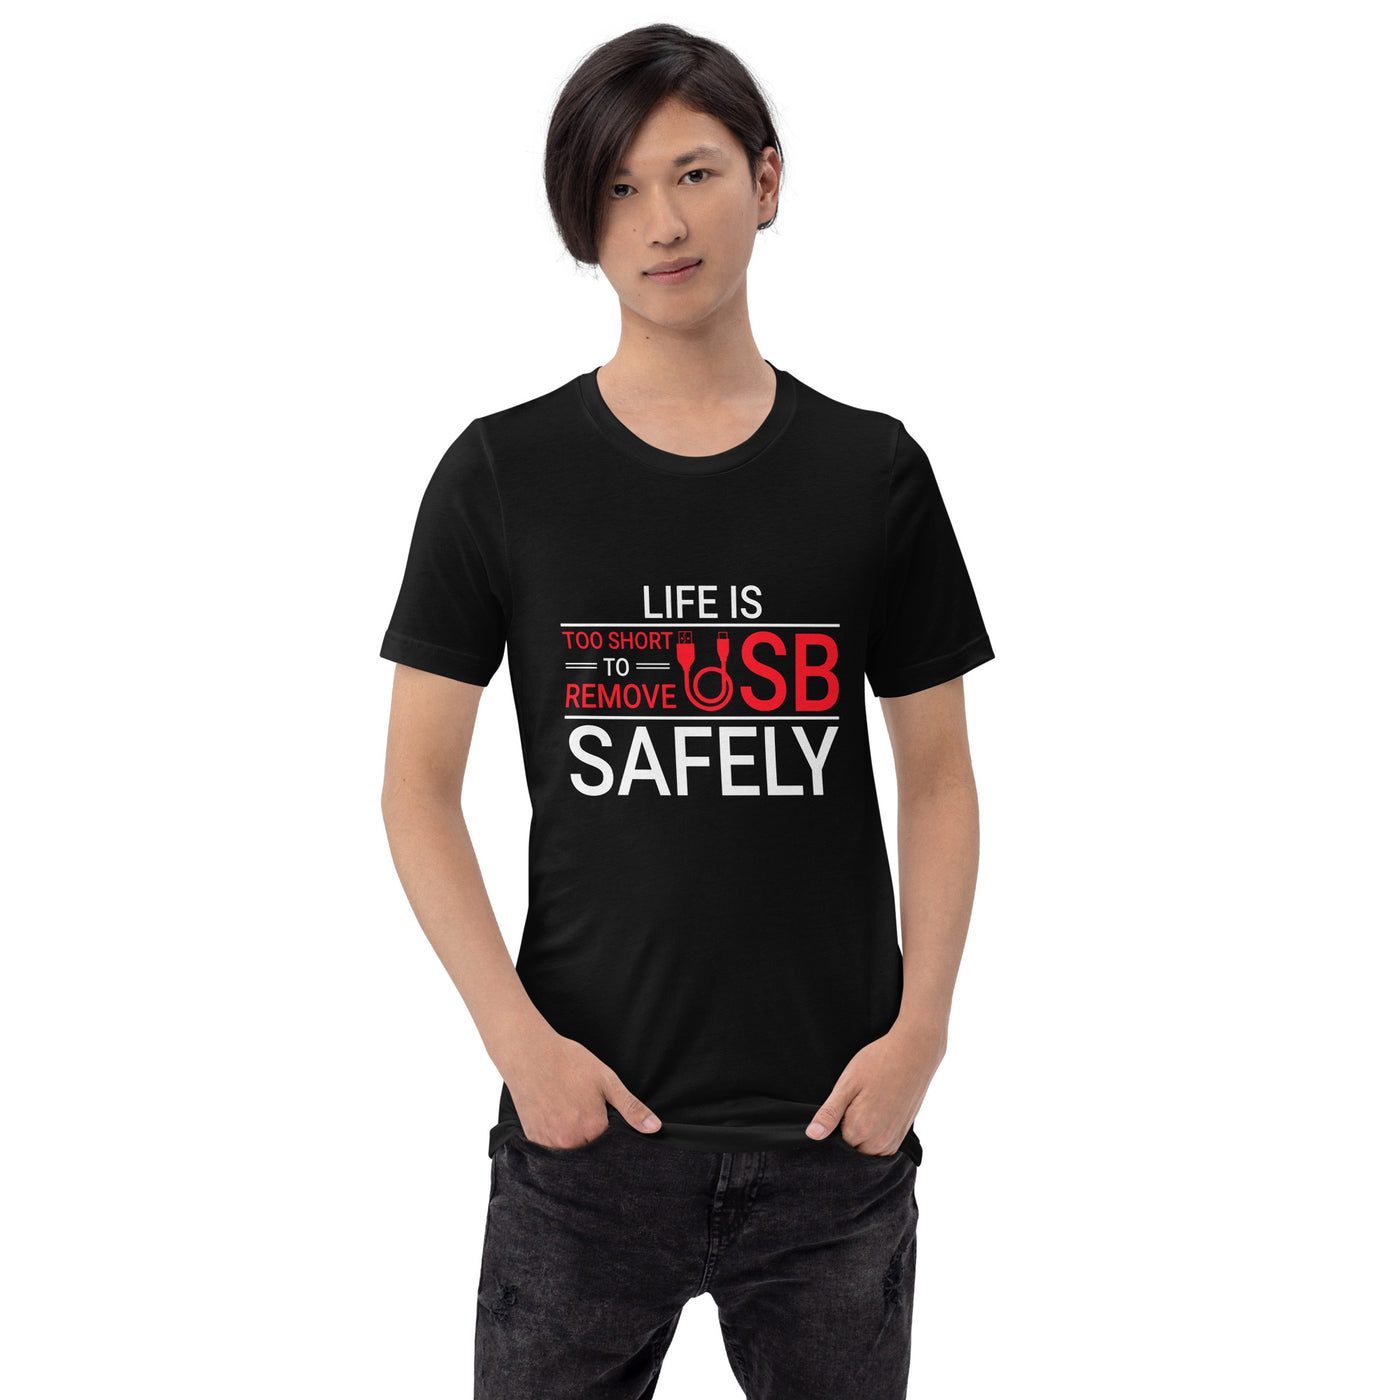 Life is too Short to Remove USB Safely - Unisex t-shirt